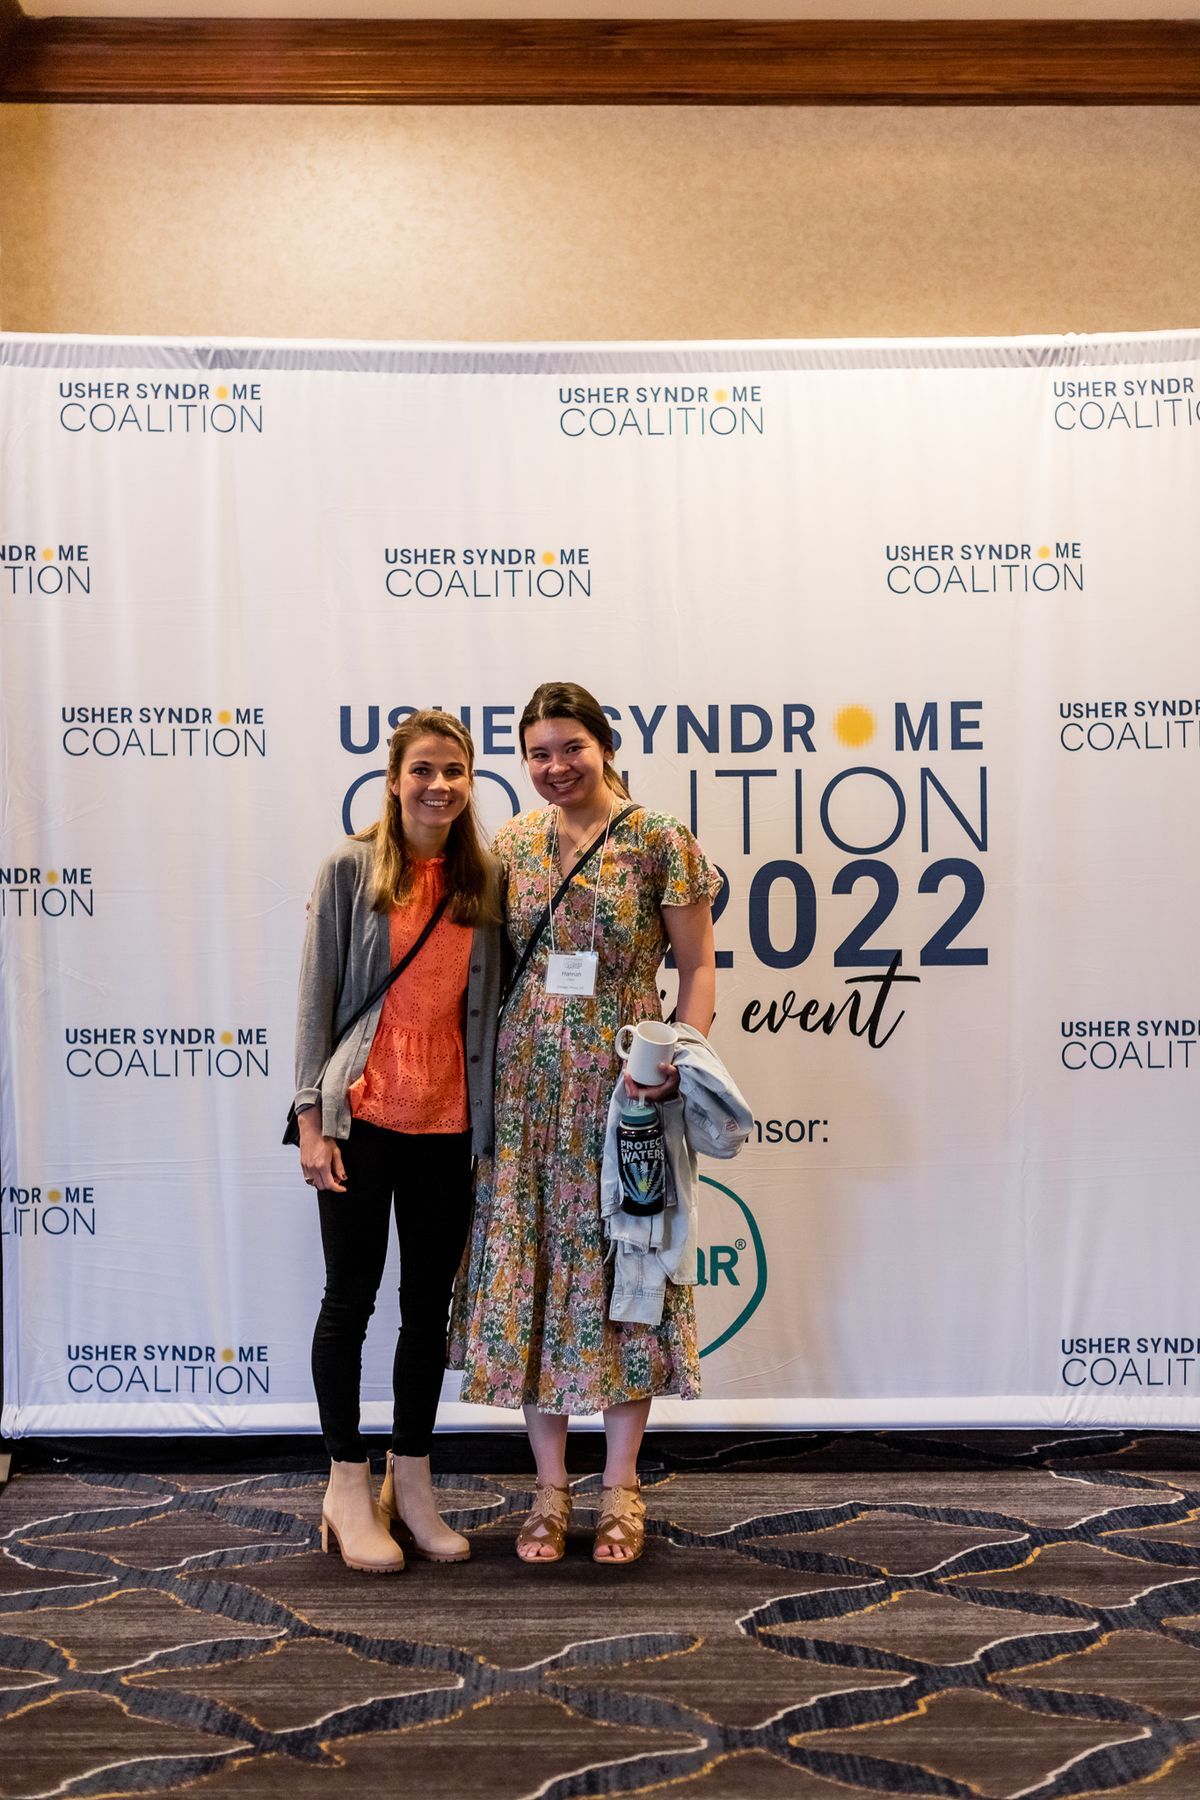 Becca Meyers and Hannah standing together in front of the Usher Syndrome Coalition step and repeat banner.